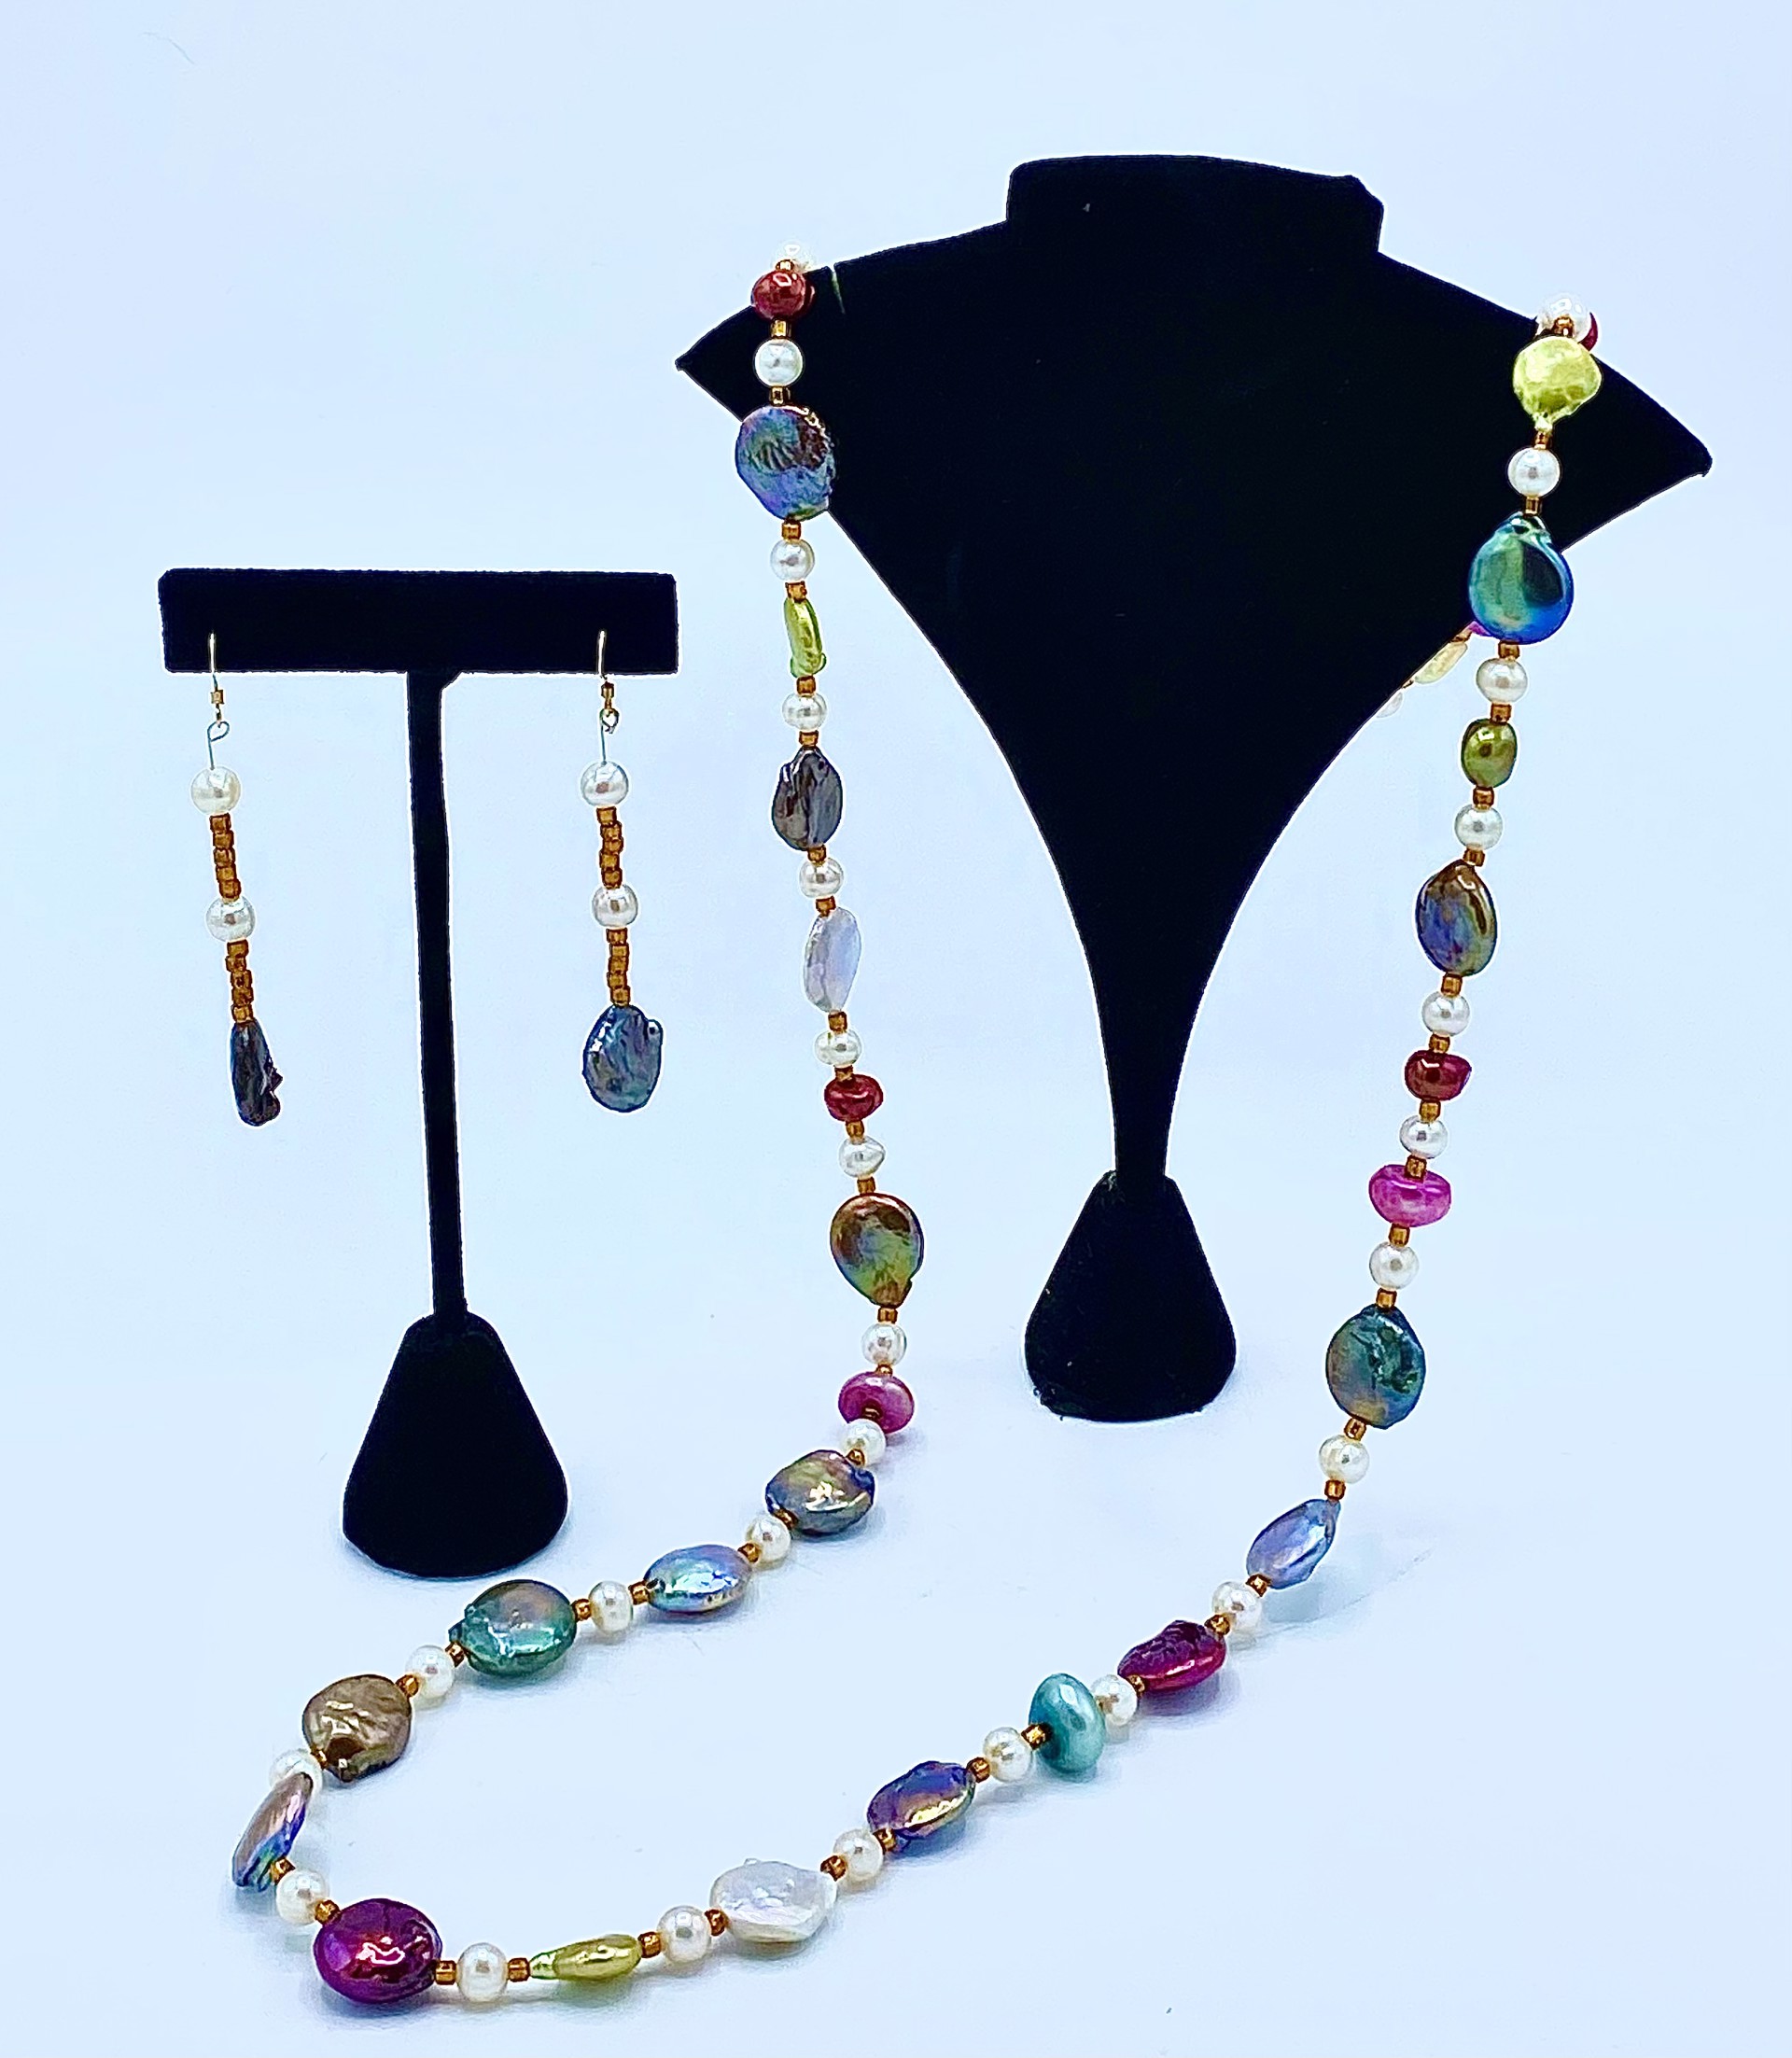 Mardi Gras Necklace and Earrings by Patrice Box